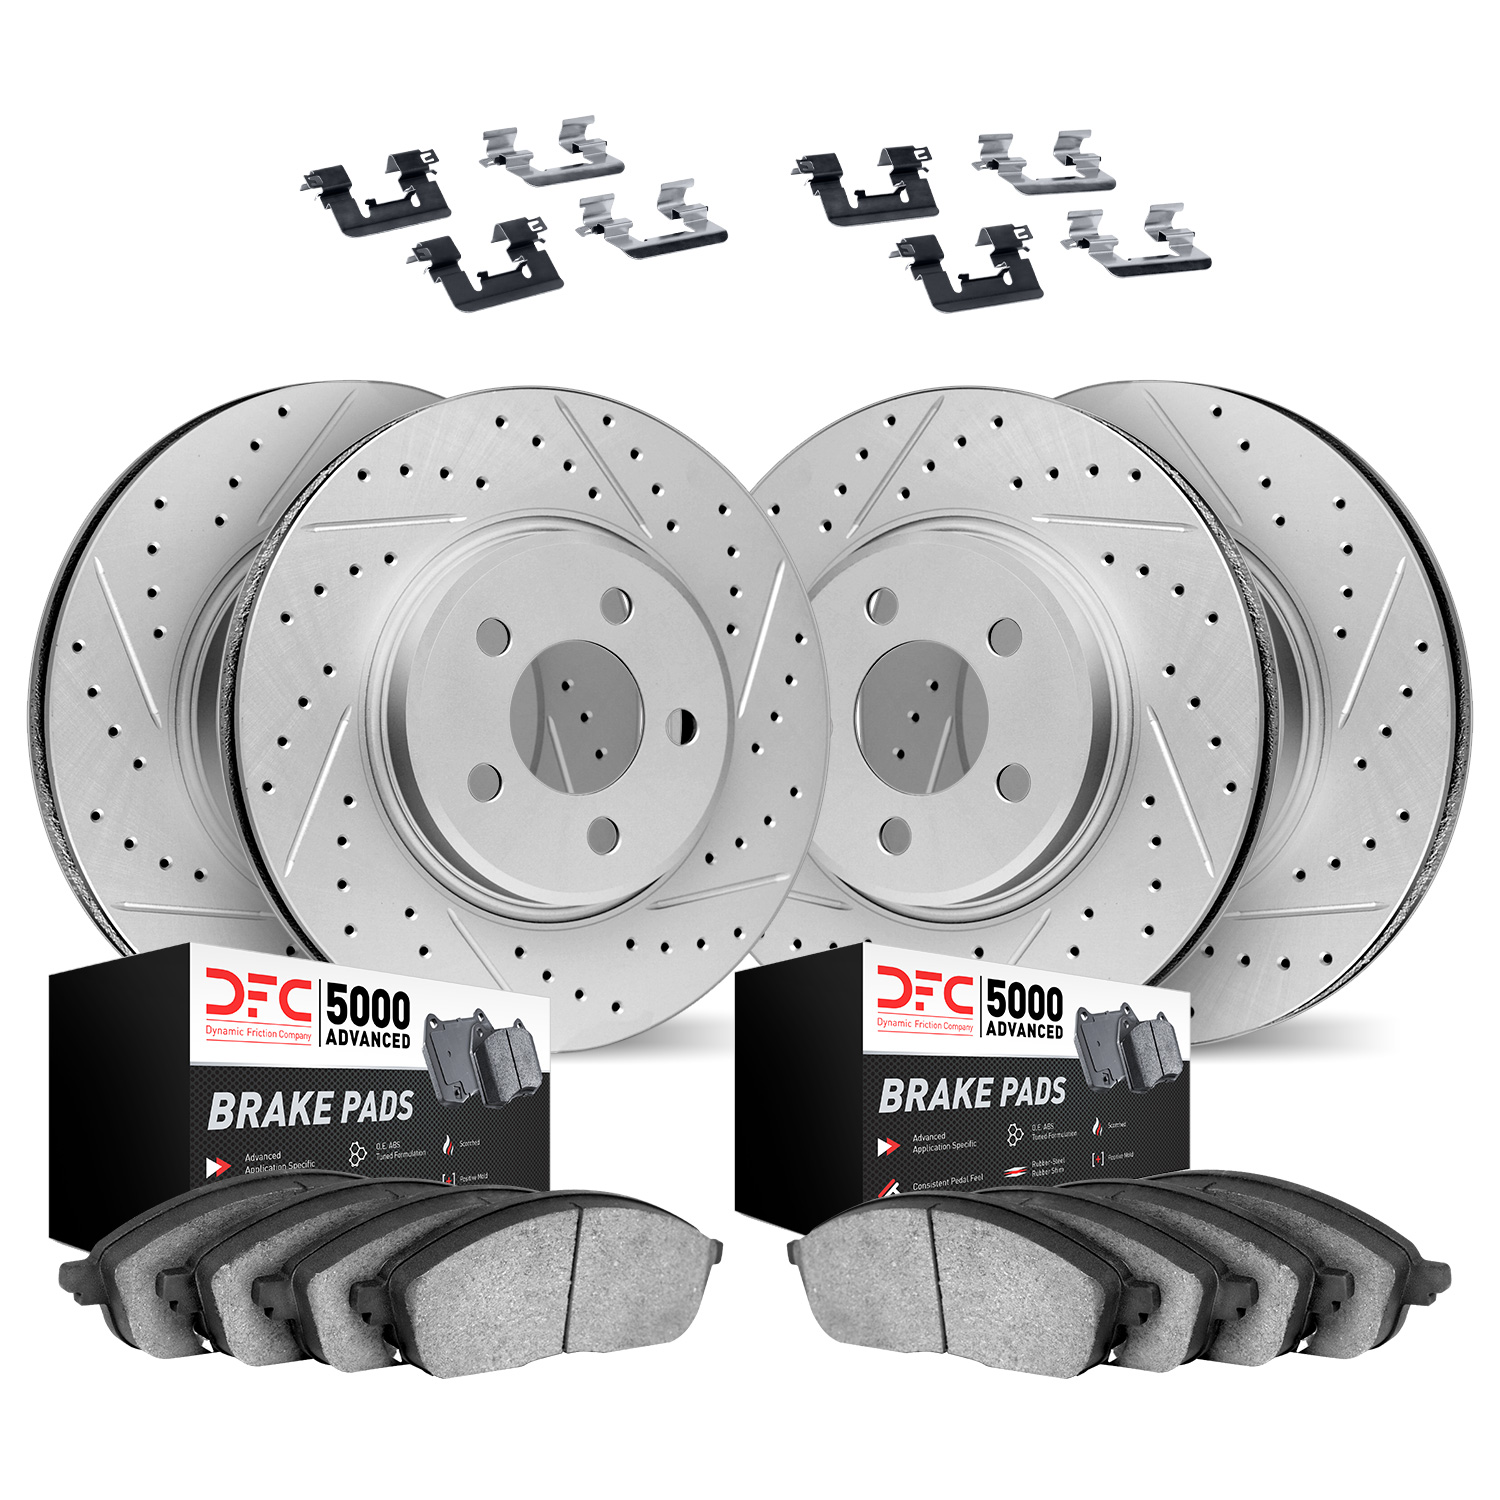 2514-31032 Geoperformance Drilled/Slotted Rotors w/5000 Advanced Brake Pads Kit & Hardware, 2011-2016 BMW, Position: Front and R